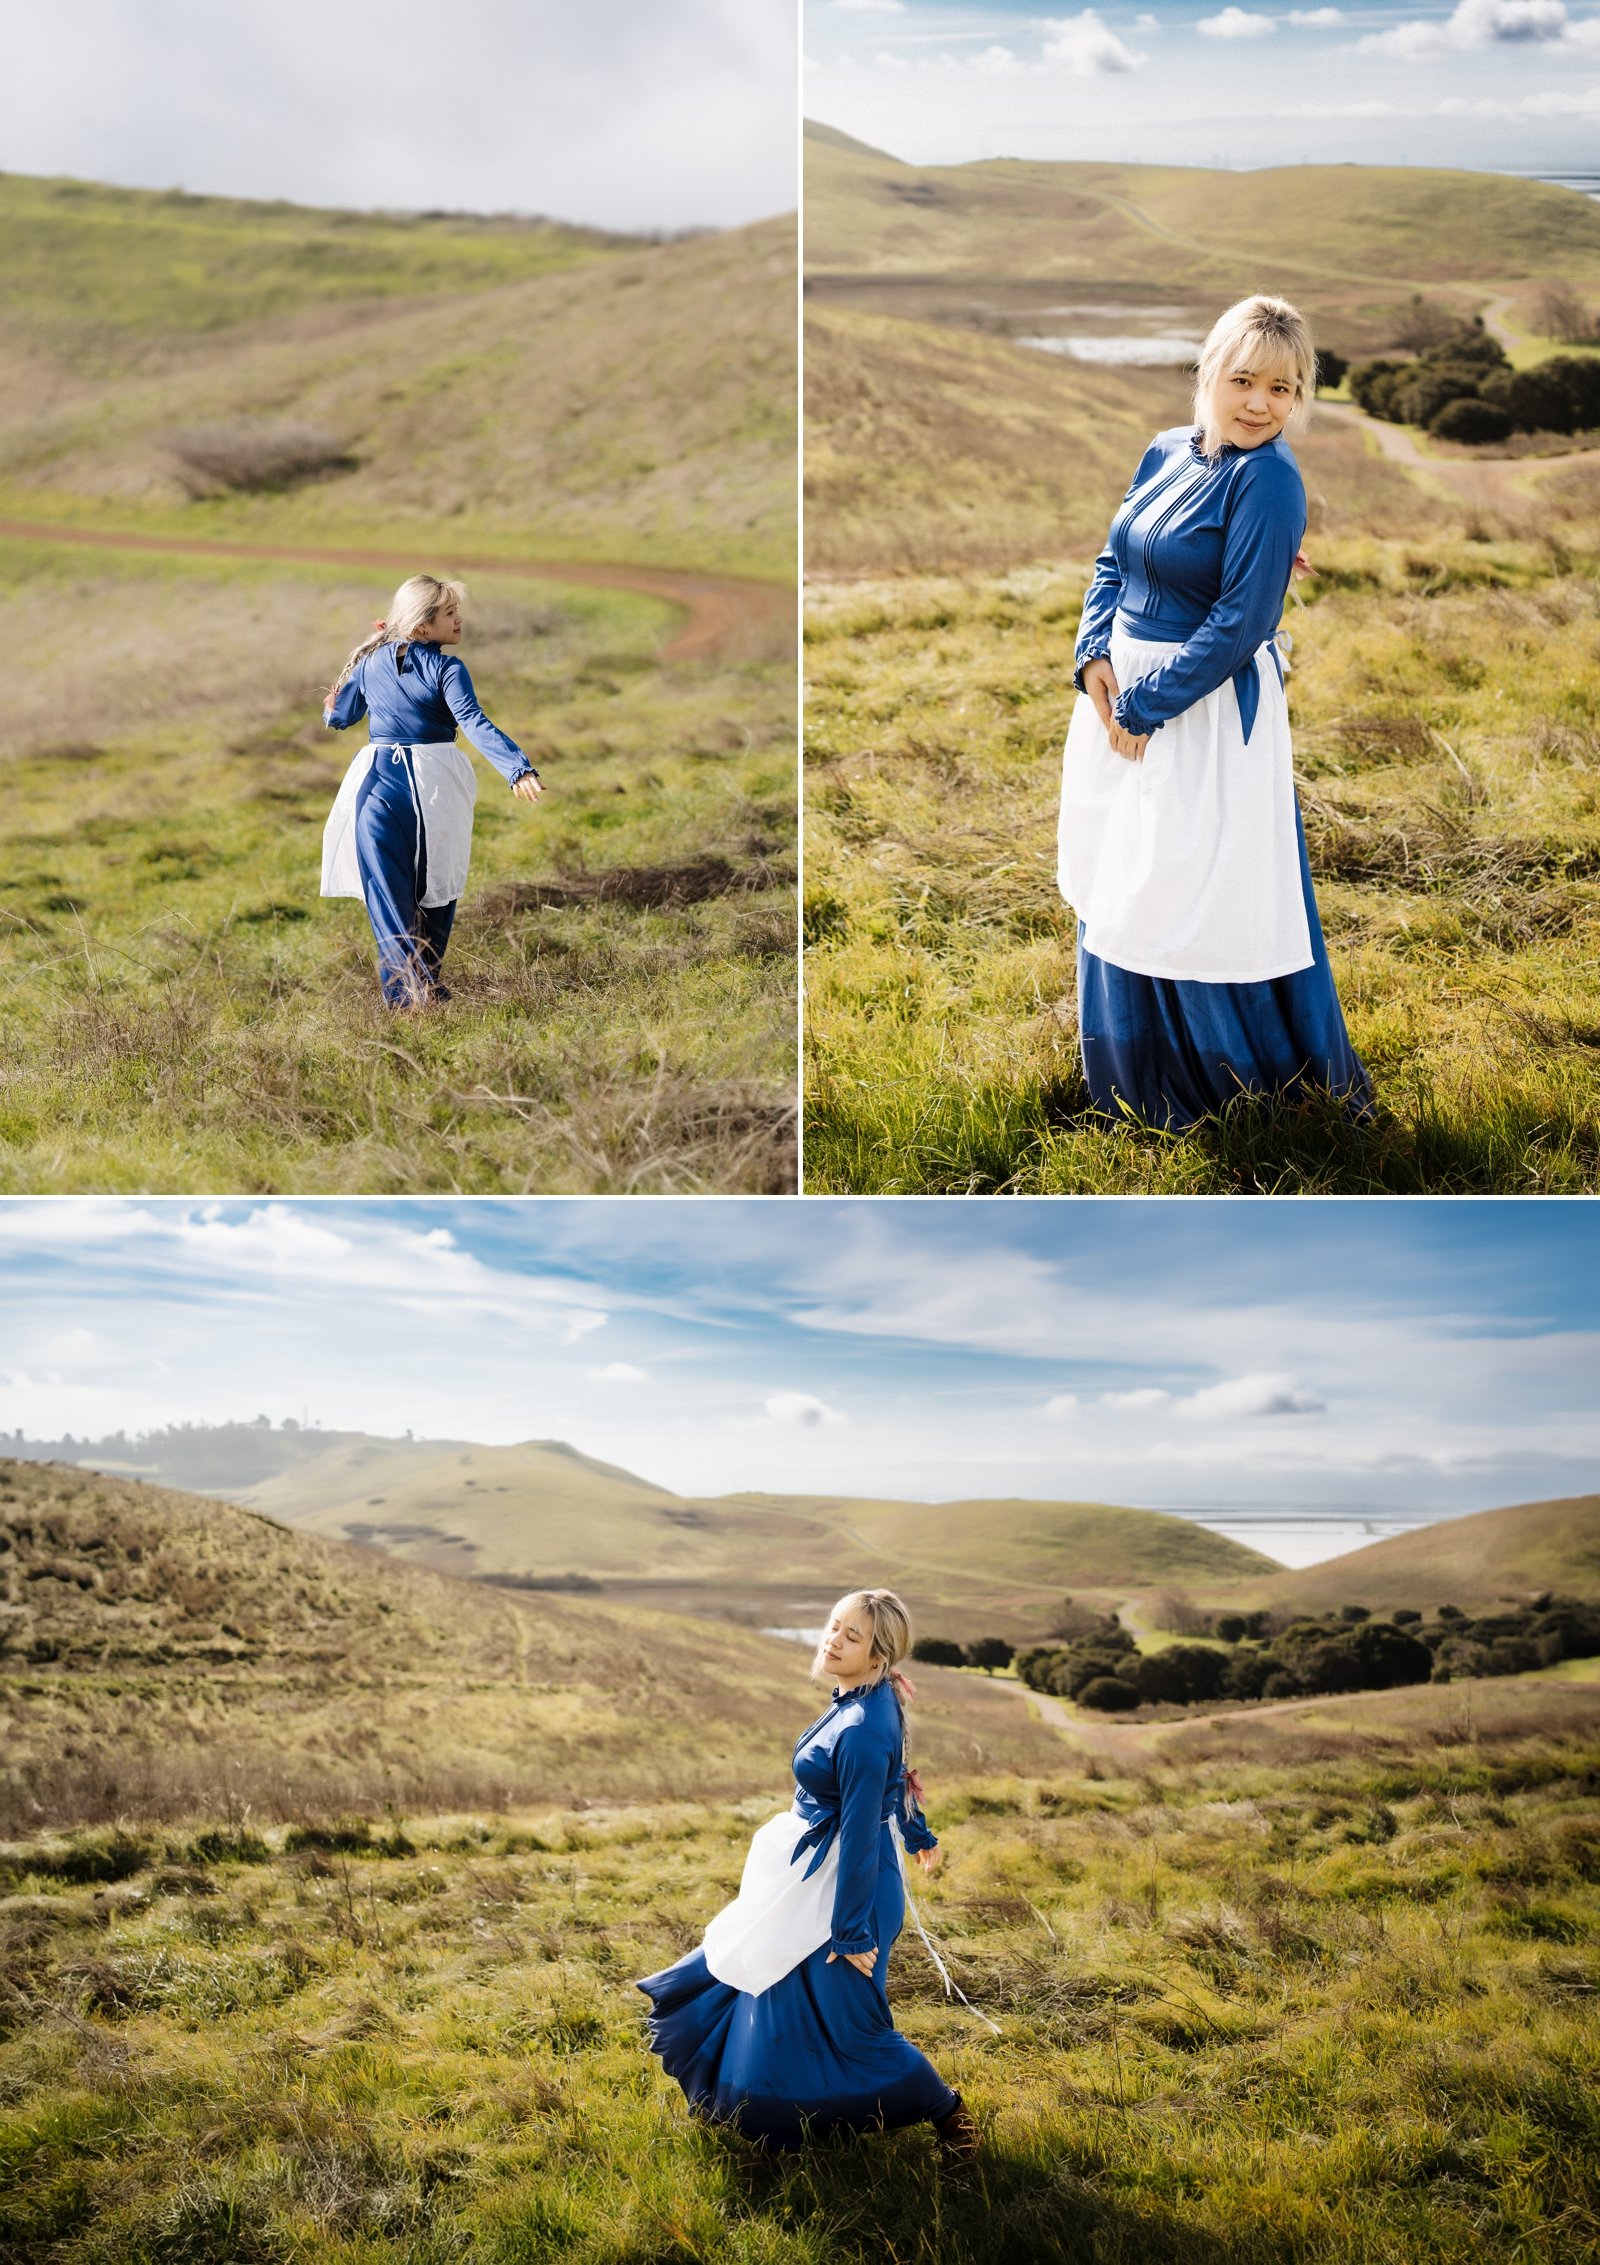 howl's moving castle sophie cosplay photoshoot bay area cosplay photographer 9.jpg